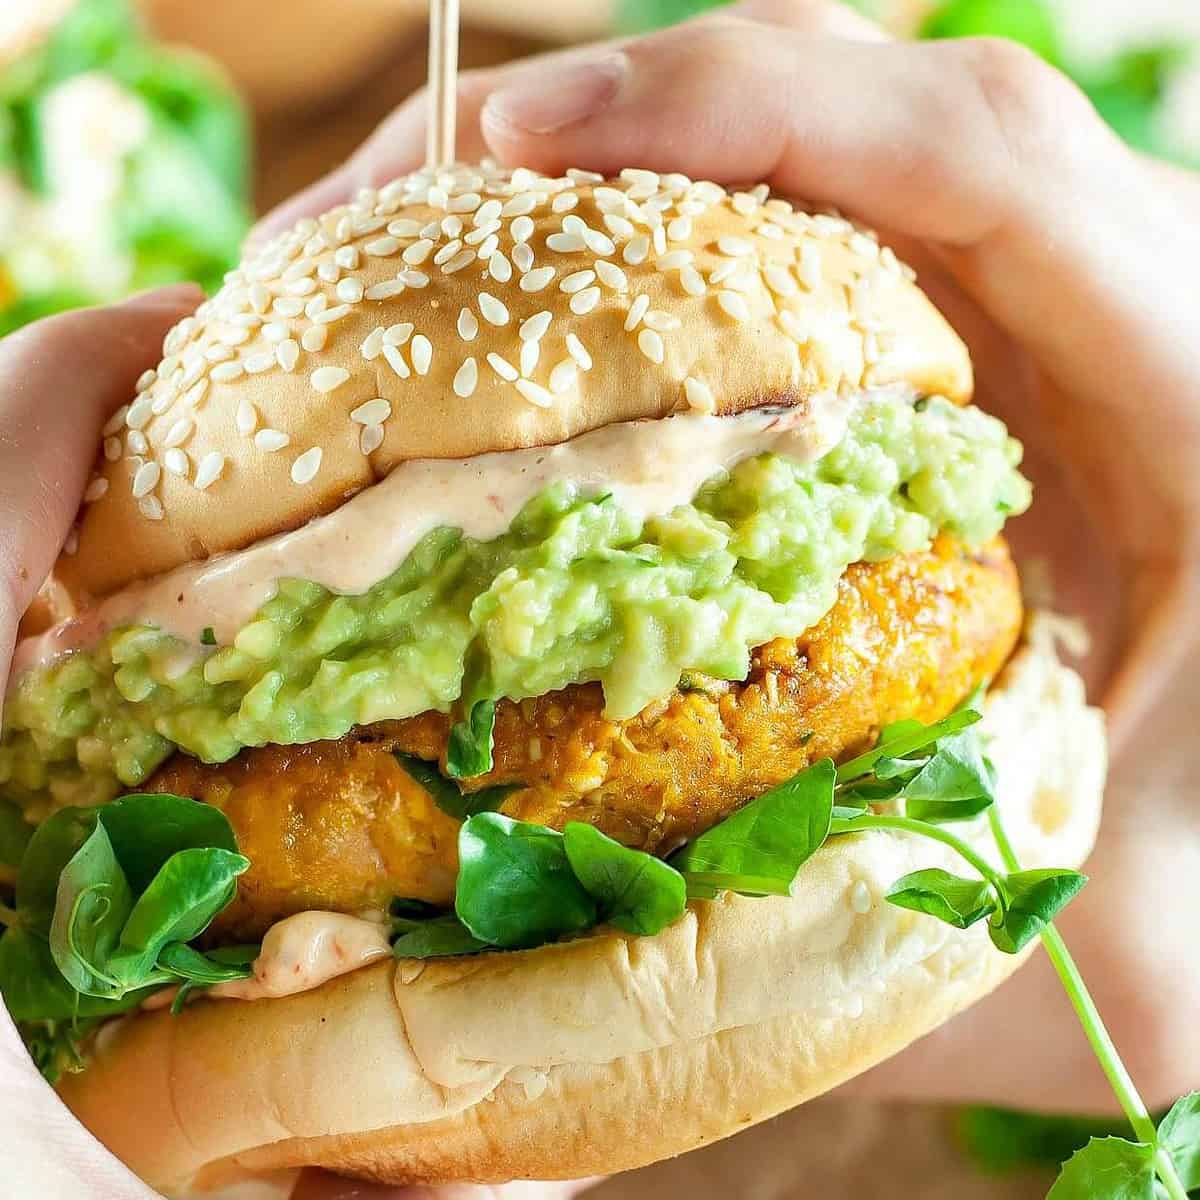  These veggie burgers are so full of flavor that even meat-eaters won't be able to resist.